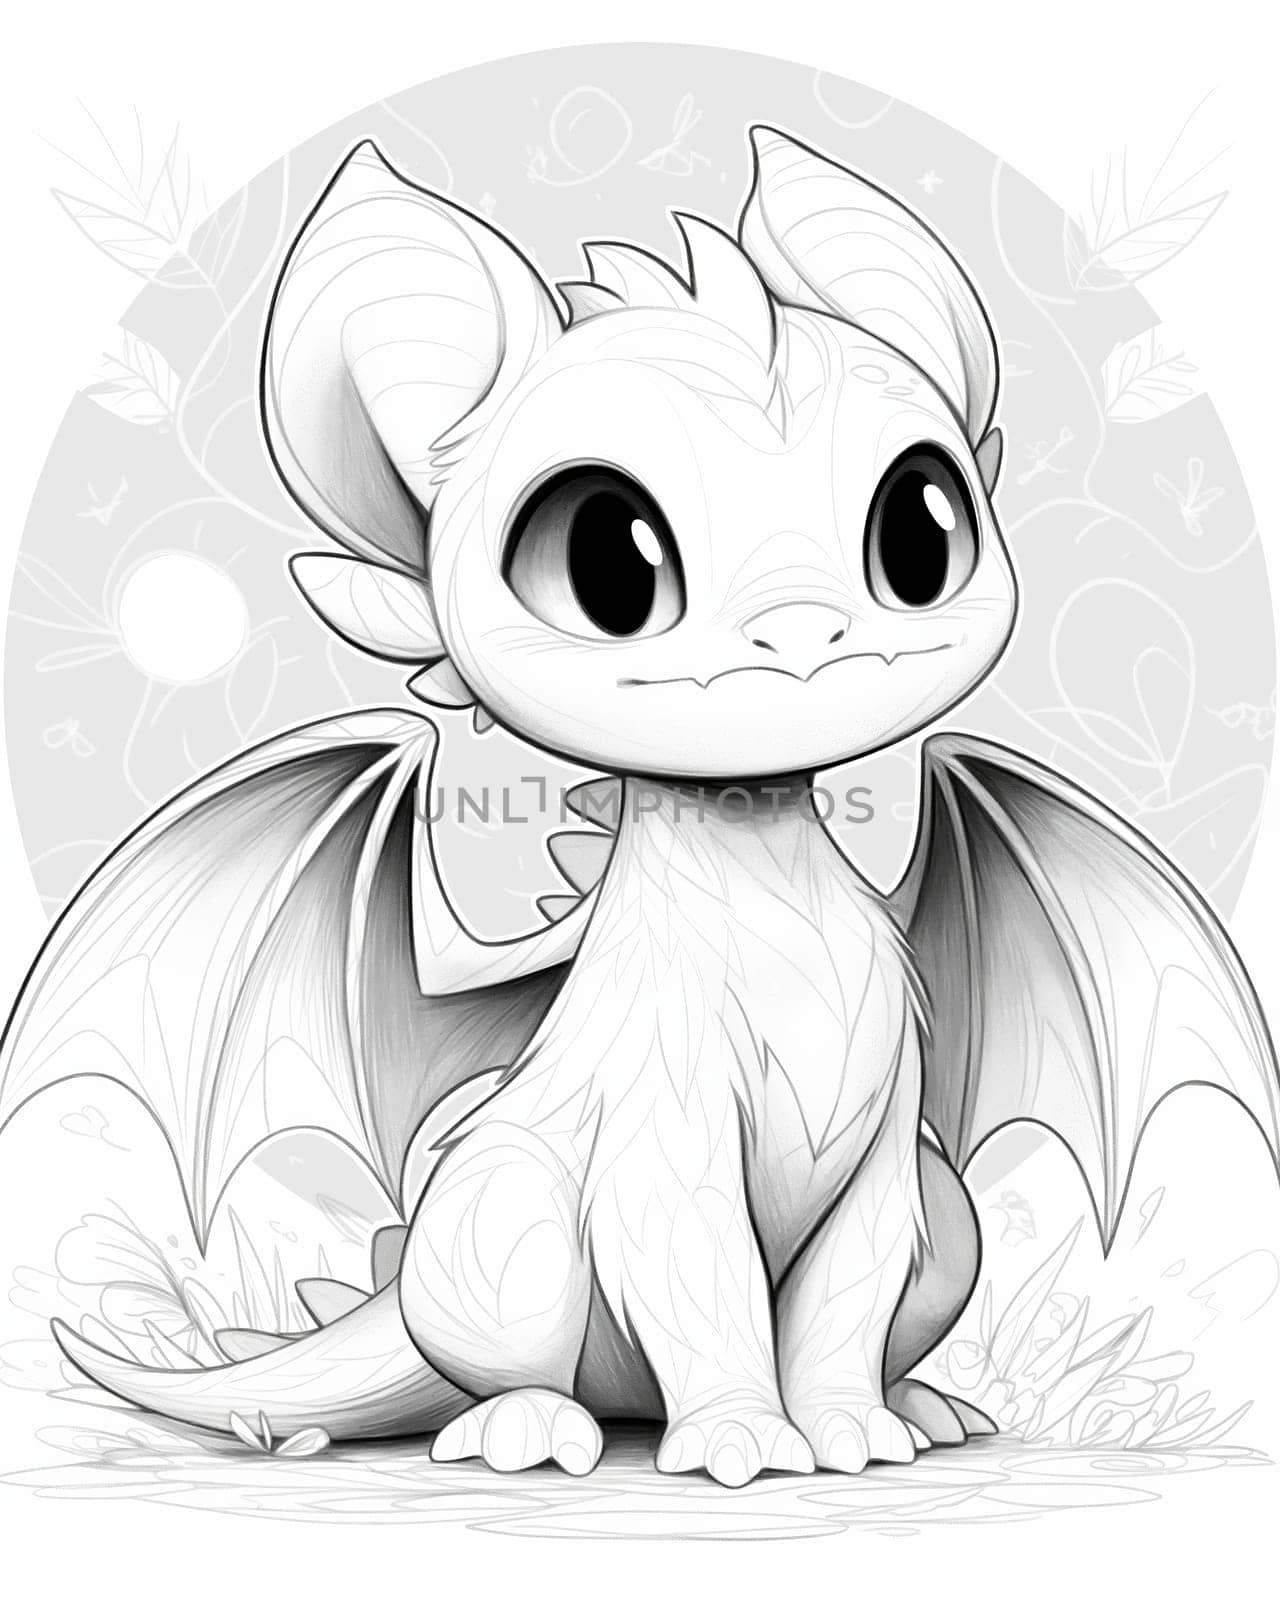 Coloring book for children, coloring animal, bat. by Fischeron